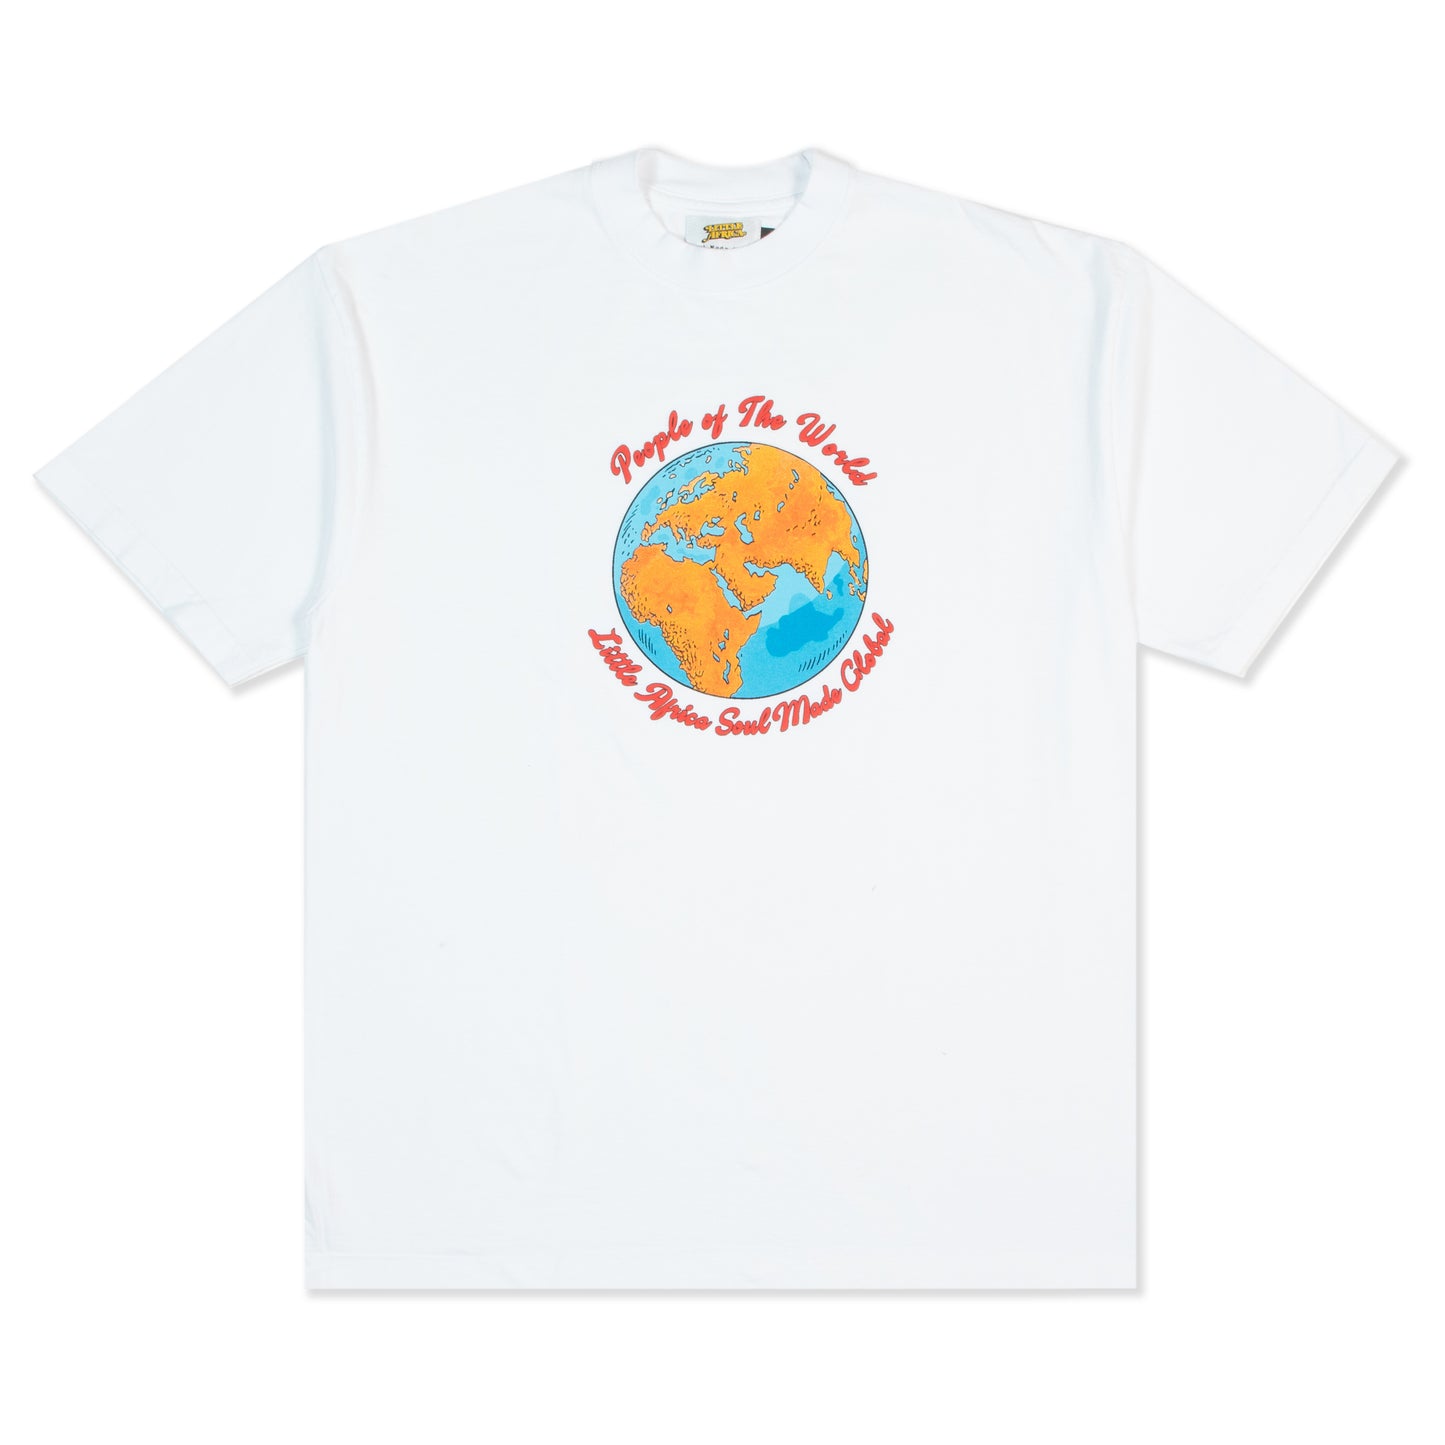 LITTLE AFRICA "People of The World Tee" (White)